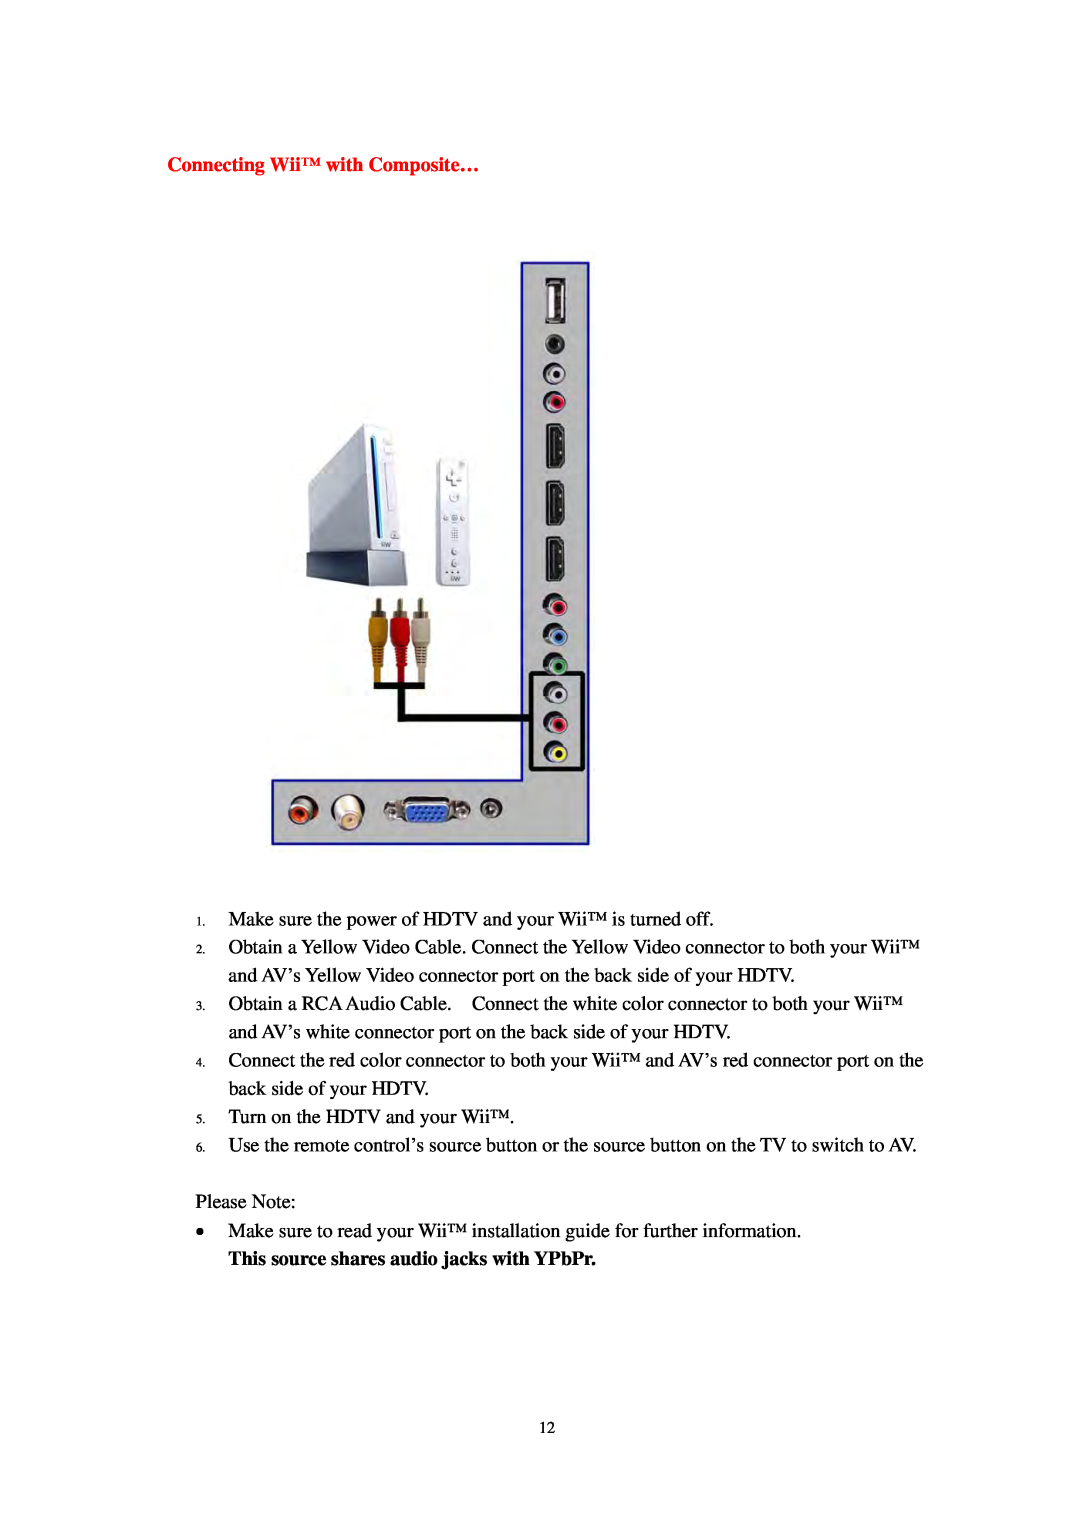 Sears PLDED3273A-B user manual Connecting Wii with Composite…, This source shares audio jacks with YPbPr 